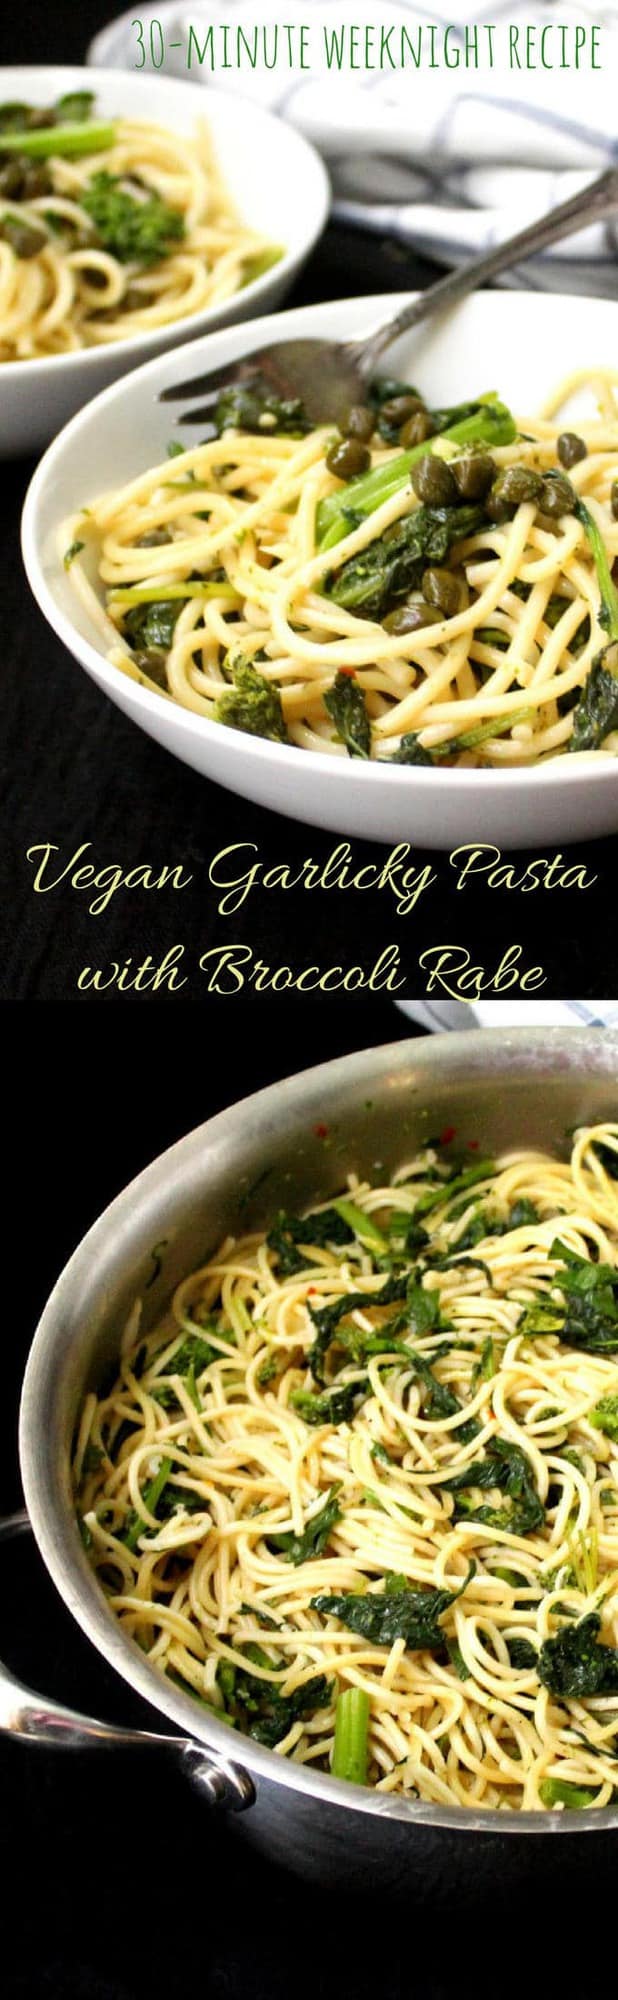 Pin image of pasta in bowls with an inlay that reads "Vegan Garlicky Pasta with Broccoli Rabe. 30-minute weeknight recipe"